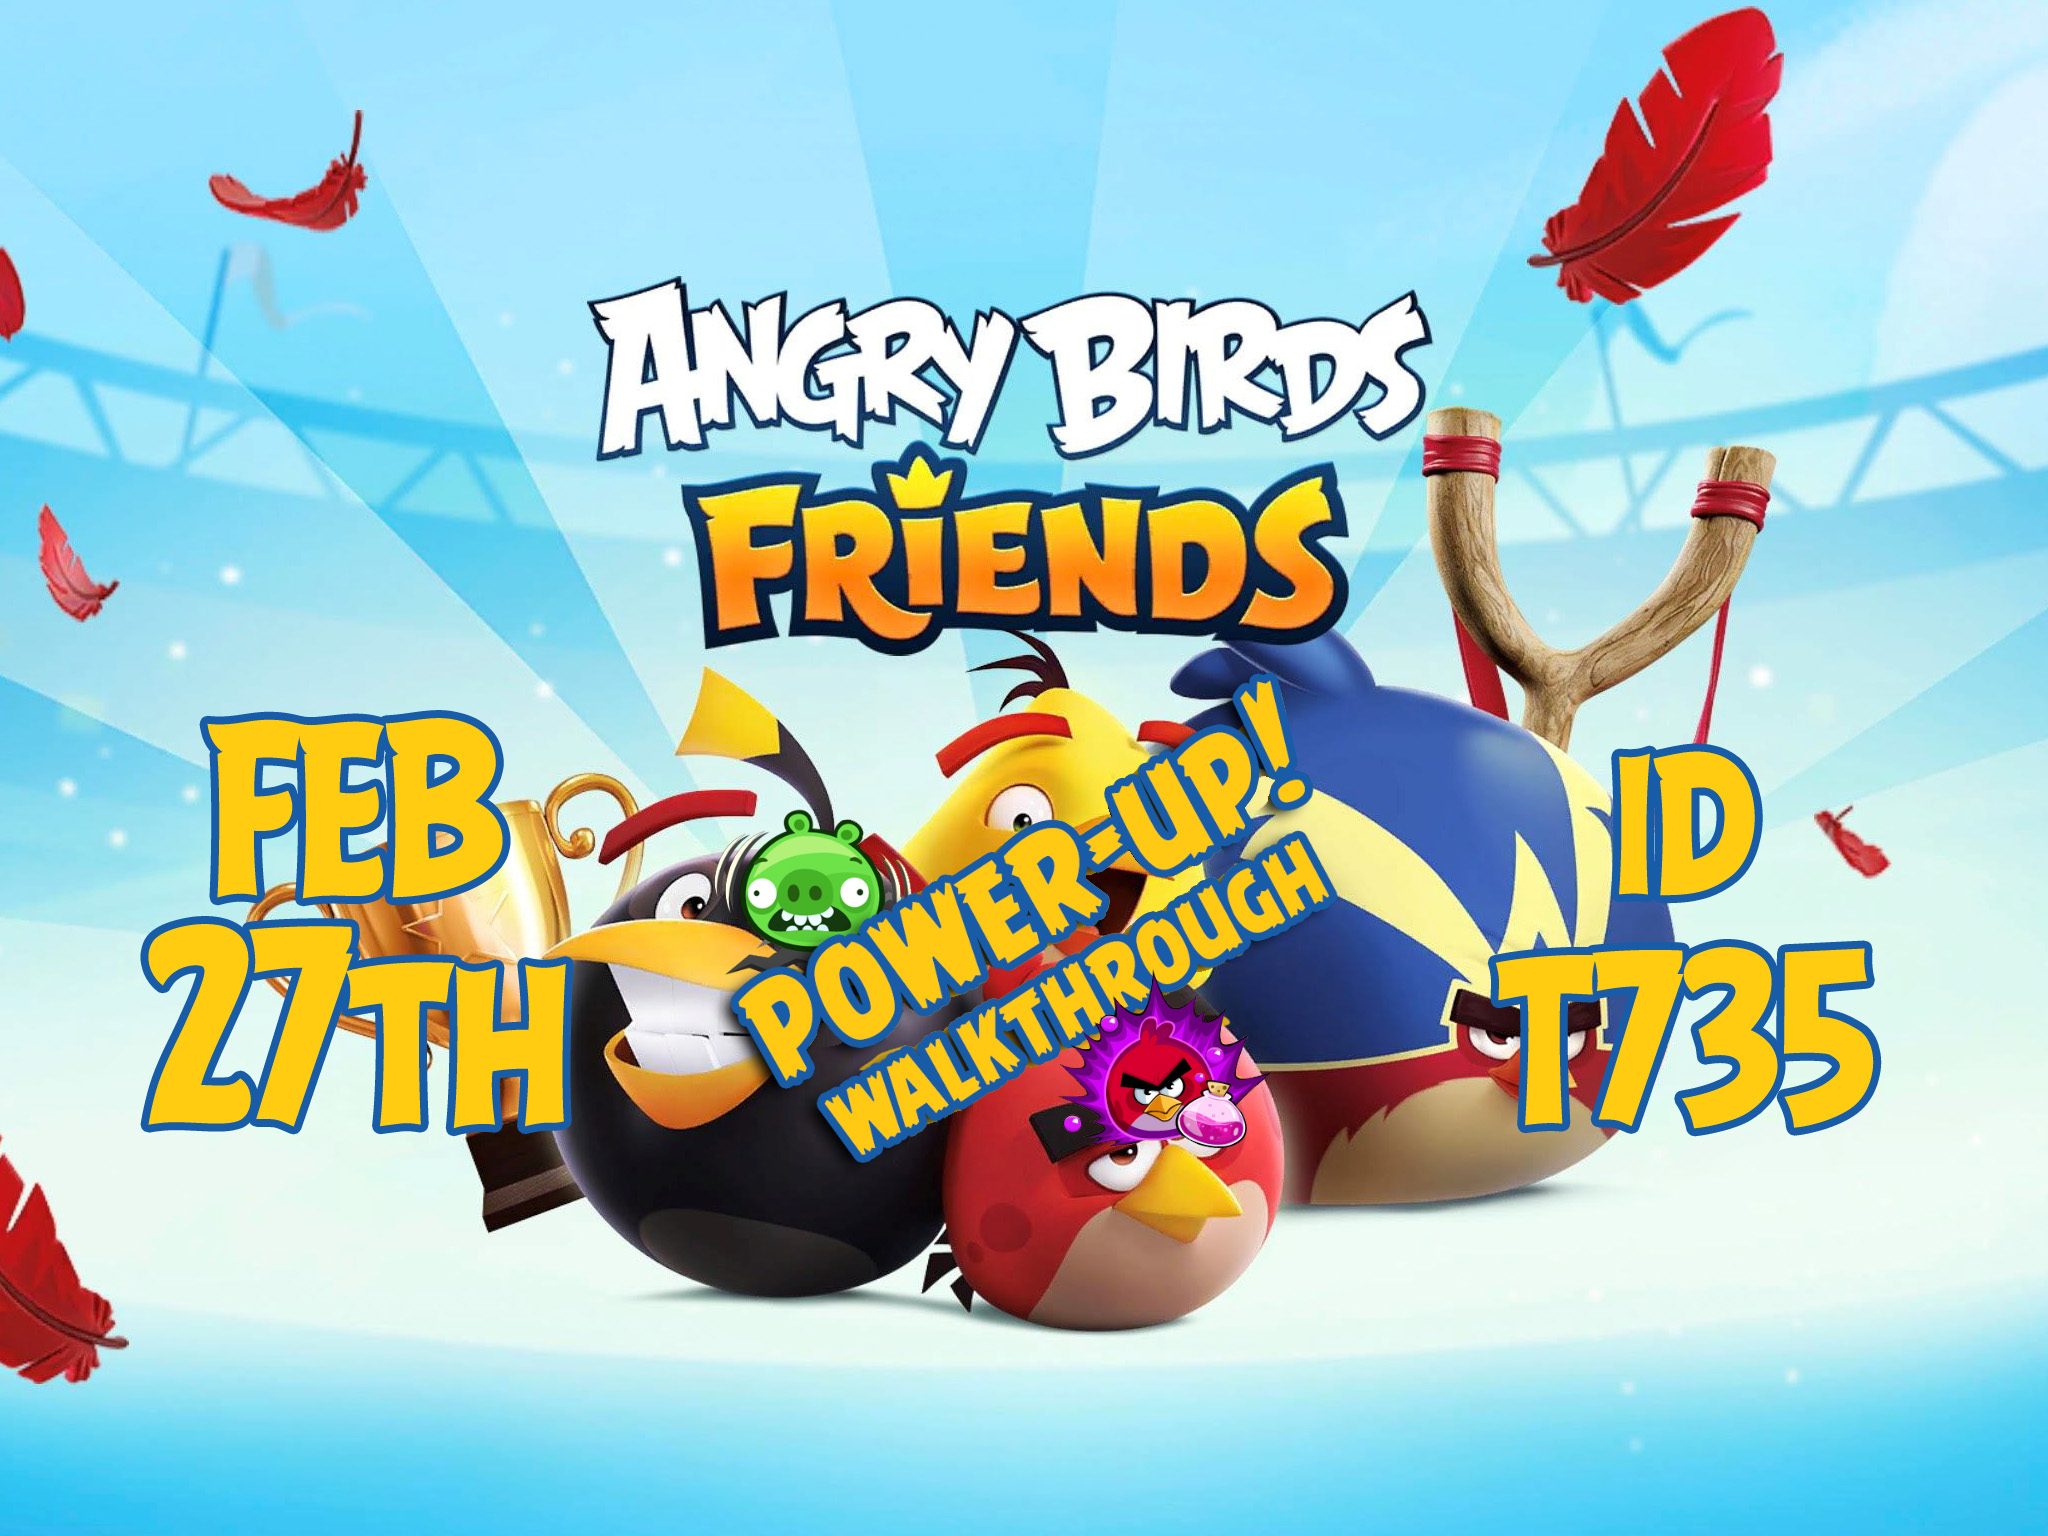 Angry-Birds-Friends-Tournament-T735c-Feature-Image-PU